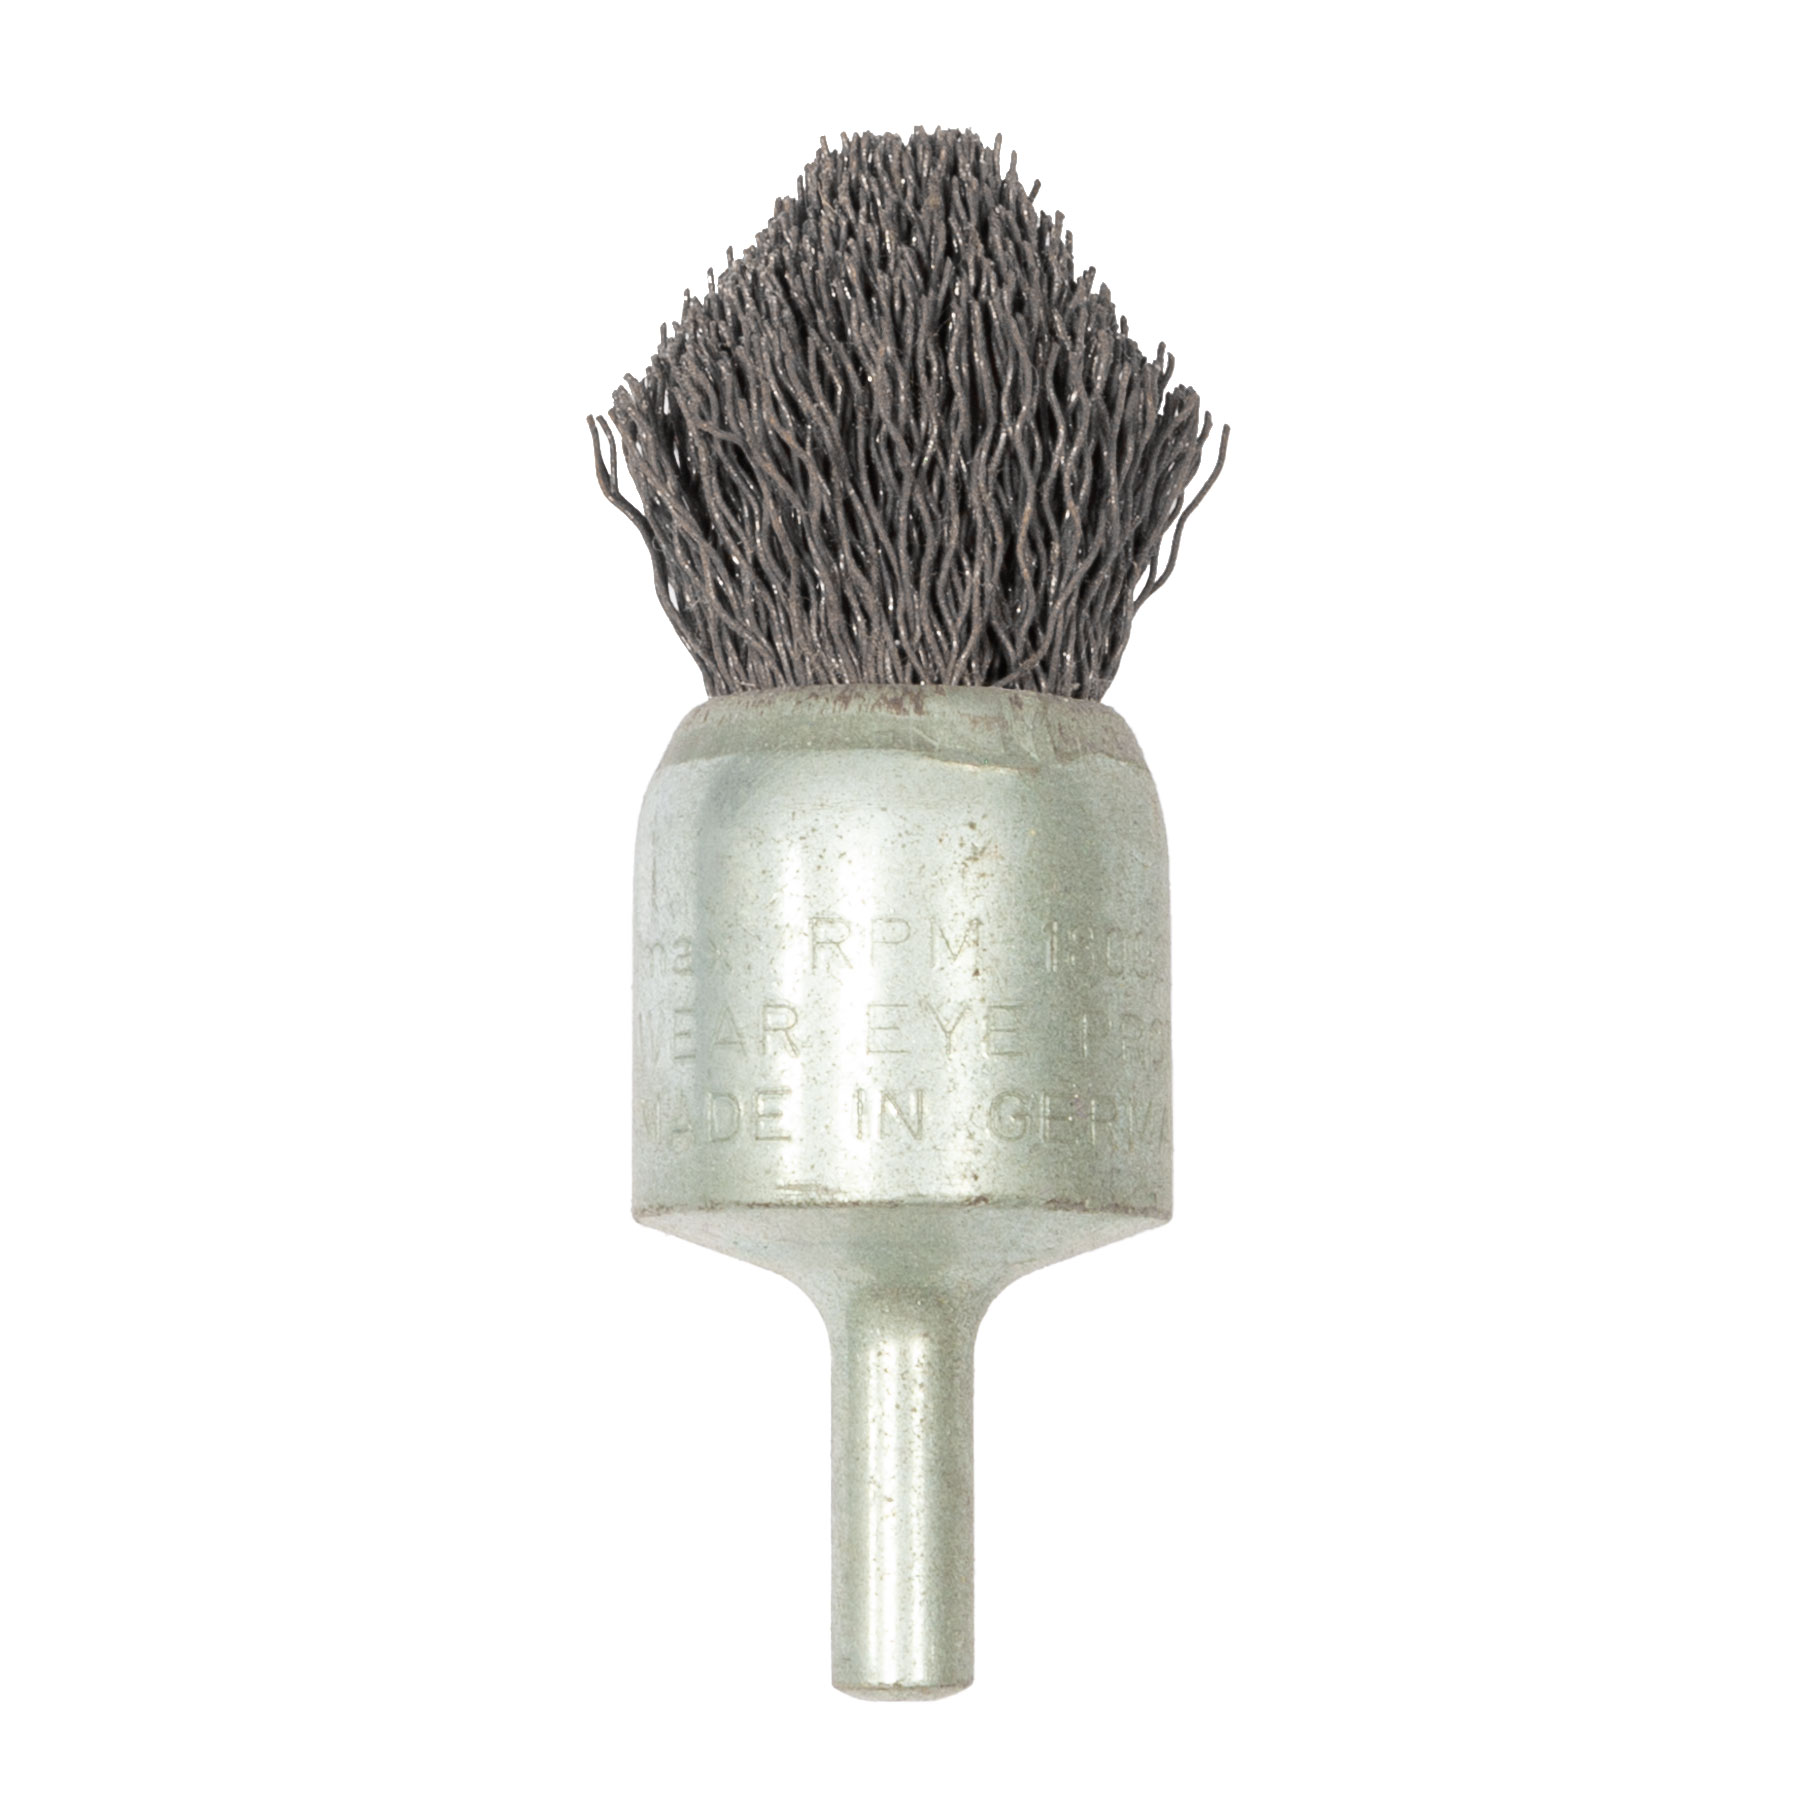 24mm Pointed Shaft End Brush